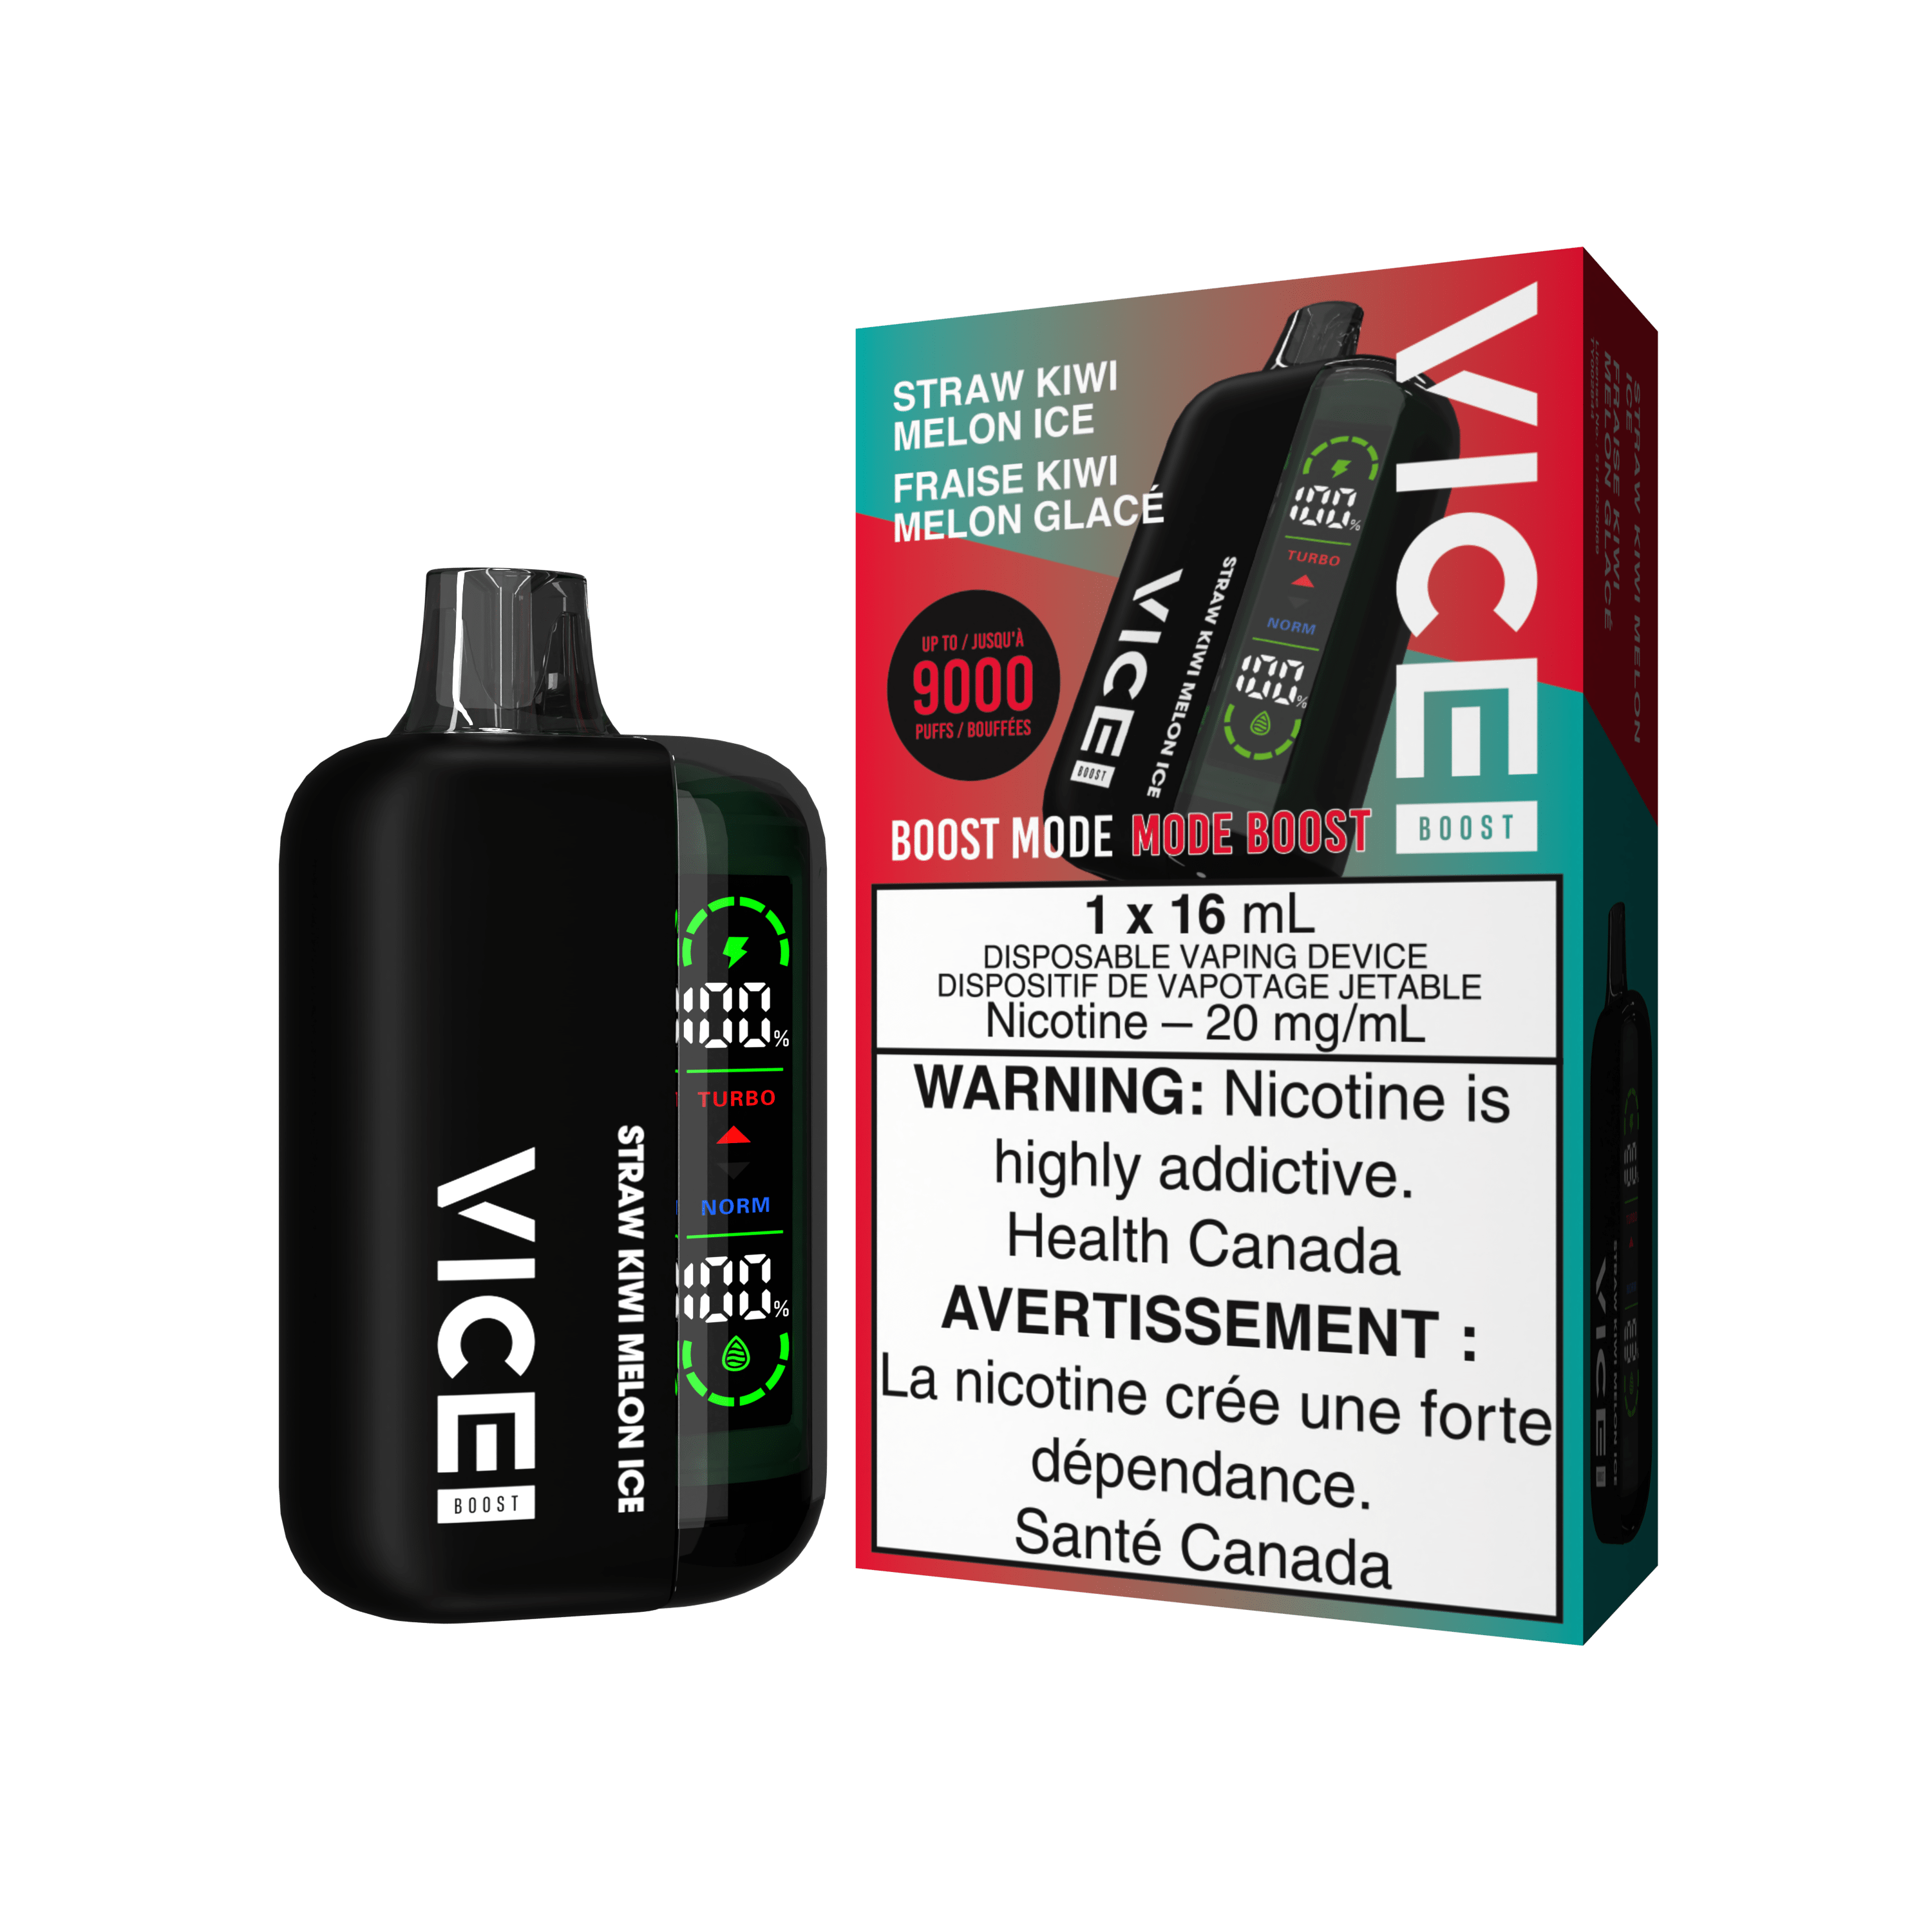 Vice Boost - Straw Kiwi Melon Ice Disposable Vape available on Canada online vape shop